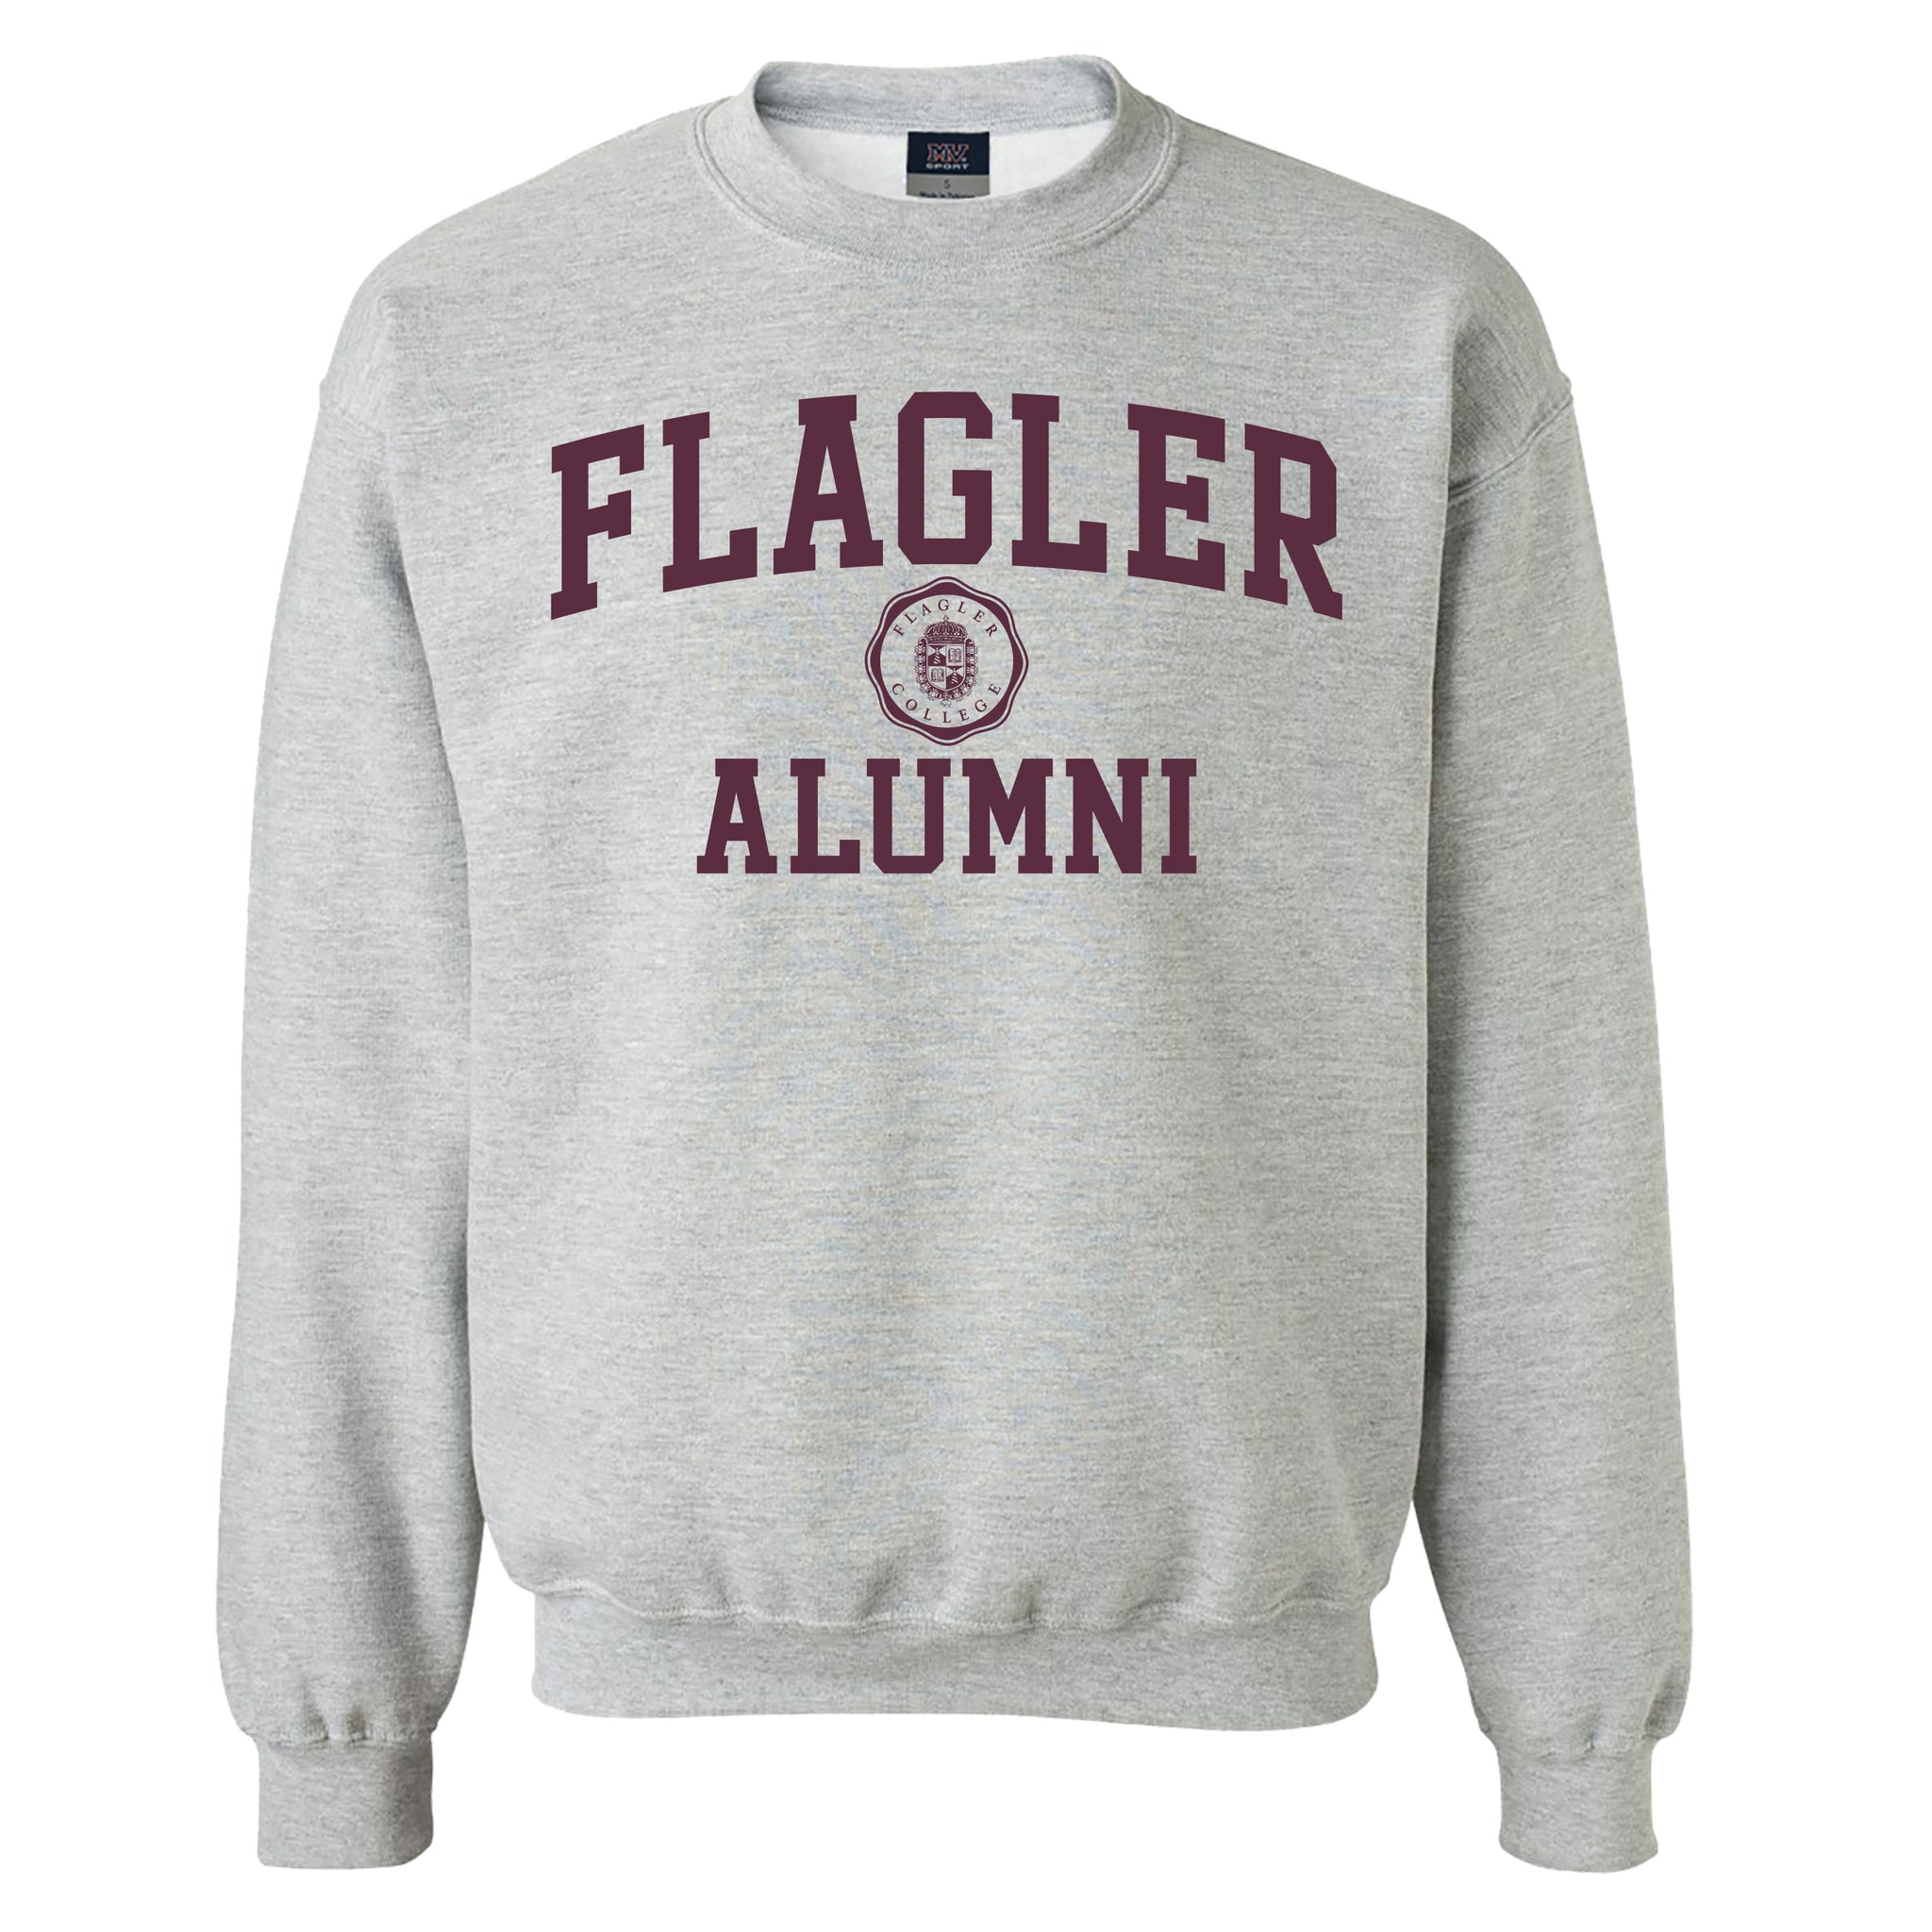 Grey crew neck with Flagler and Alumni printed in red. in between Flagler and alumni is a shield seal also in red